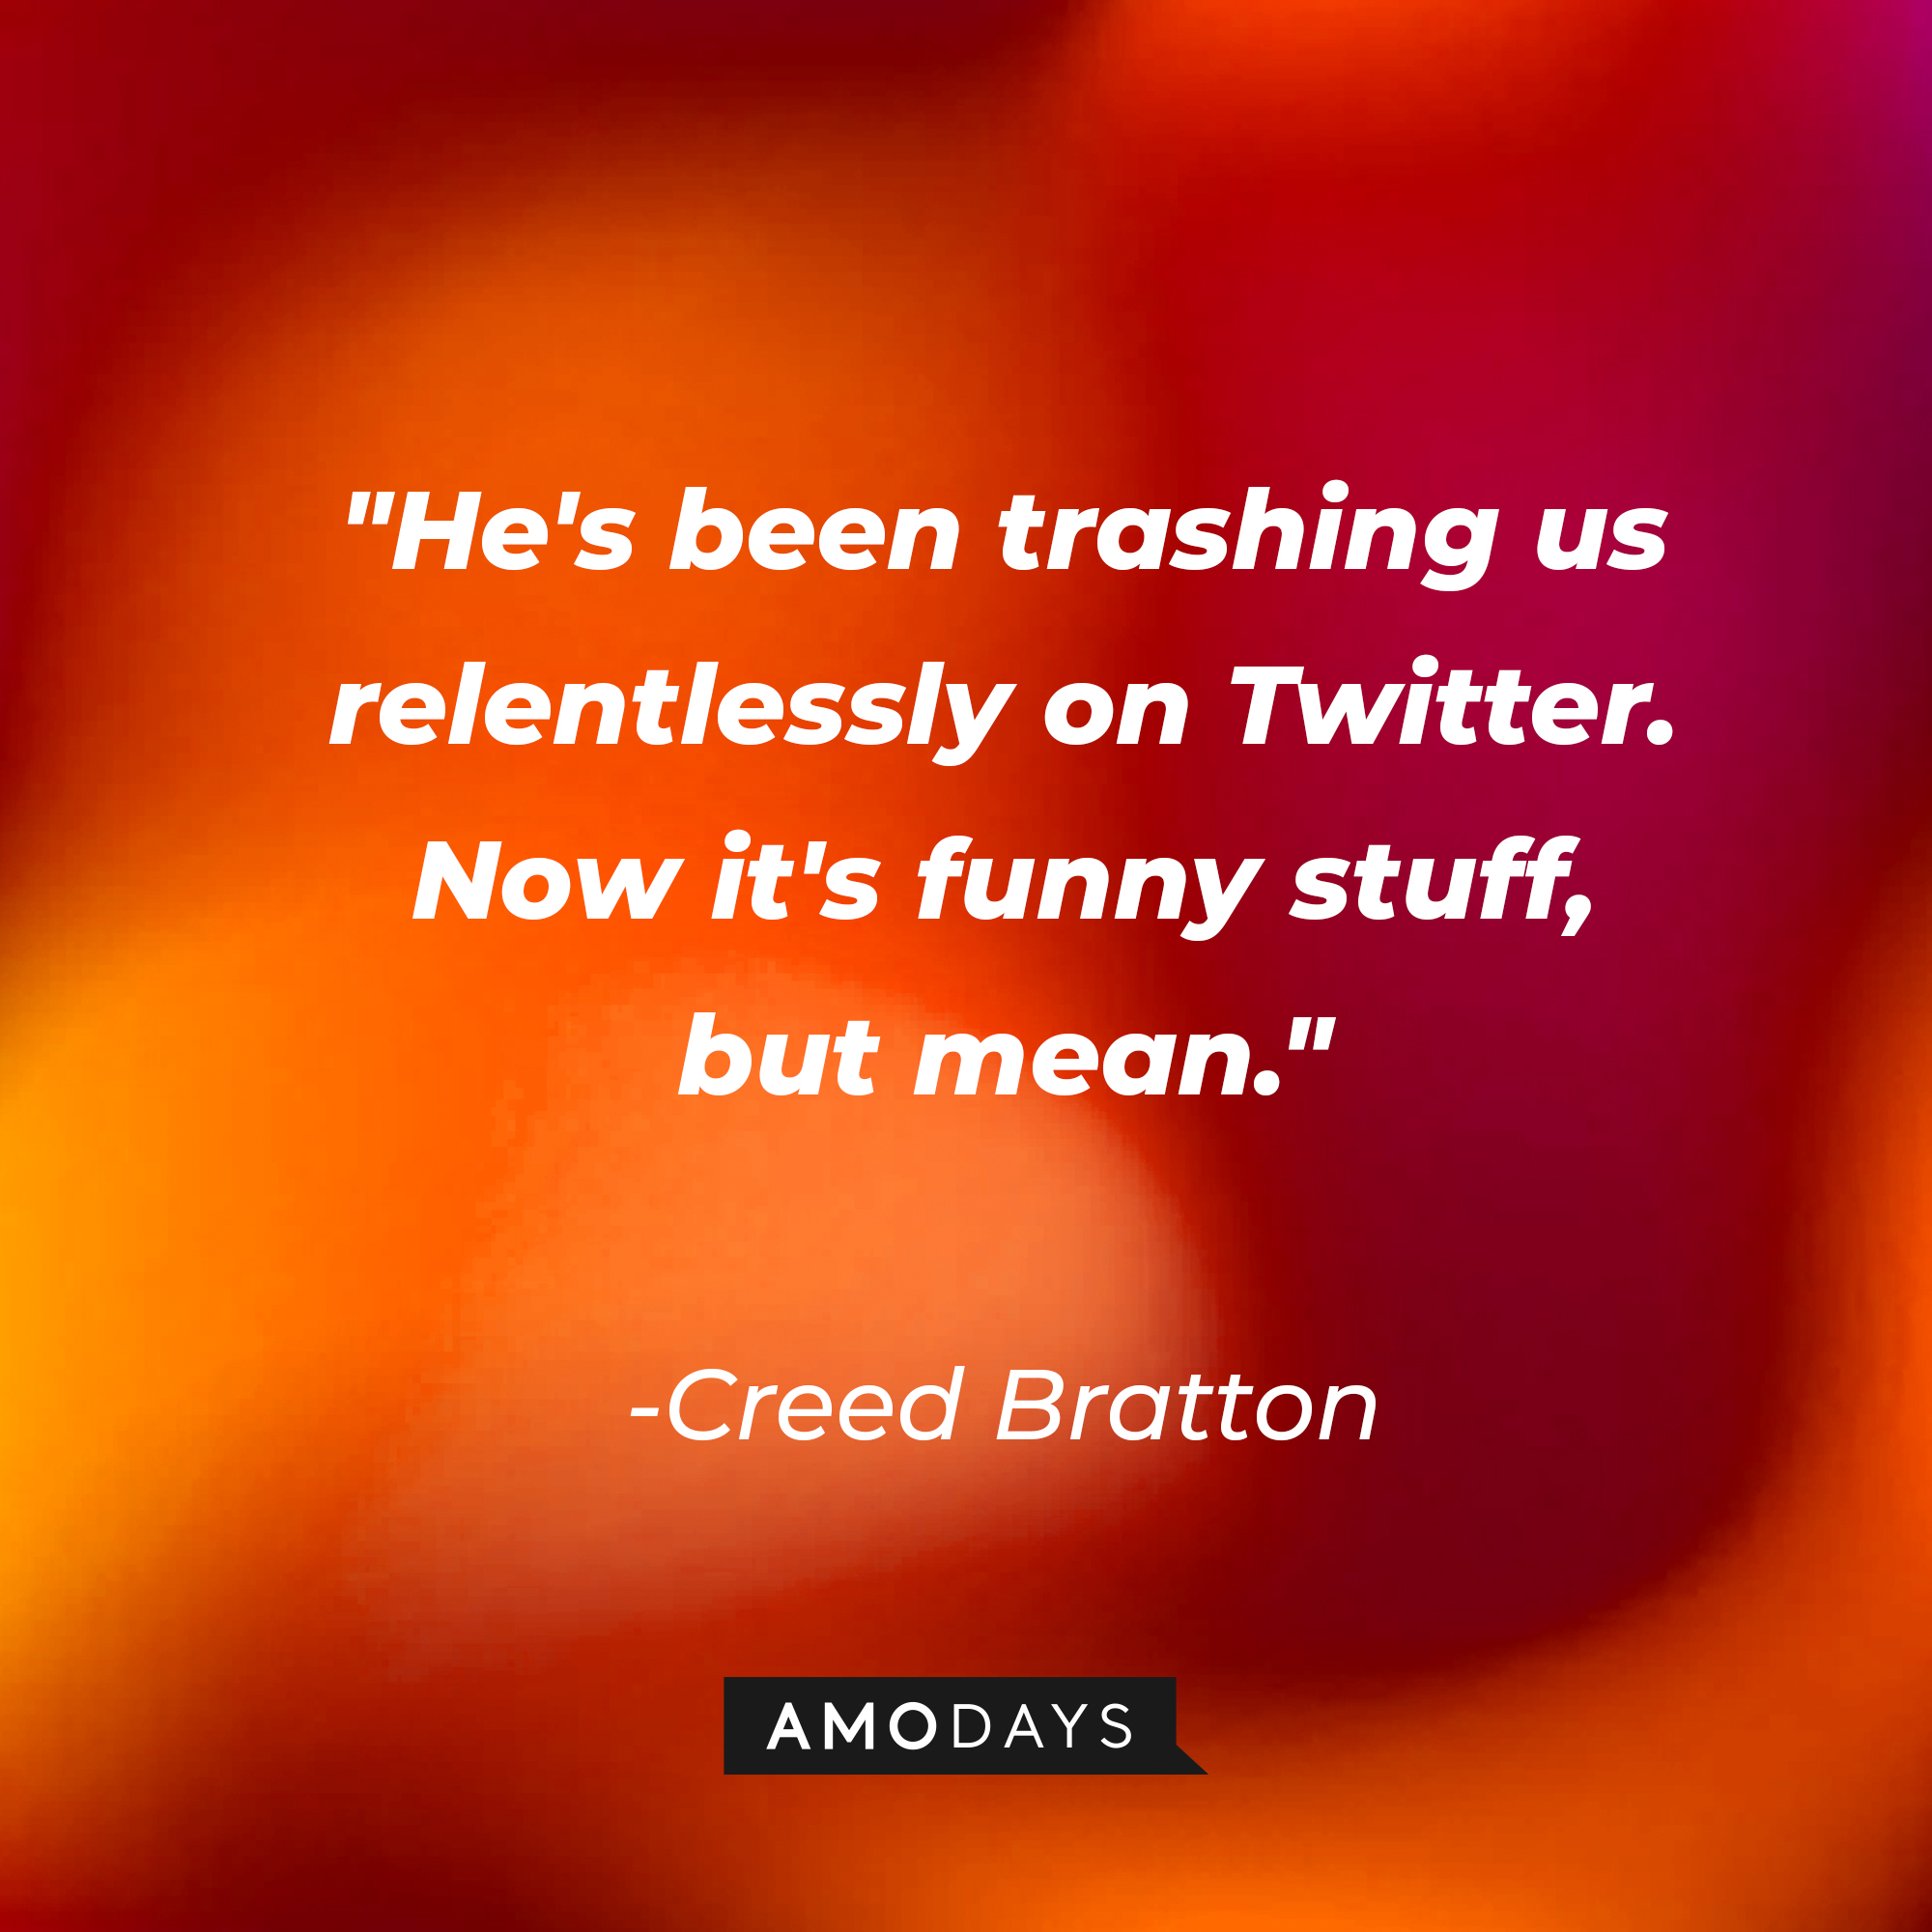 Creed Bratton's quote: "He's been trashing us relentlessly on Twitter. Now it's funny stuff, but mean." | Source: AmoDays